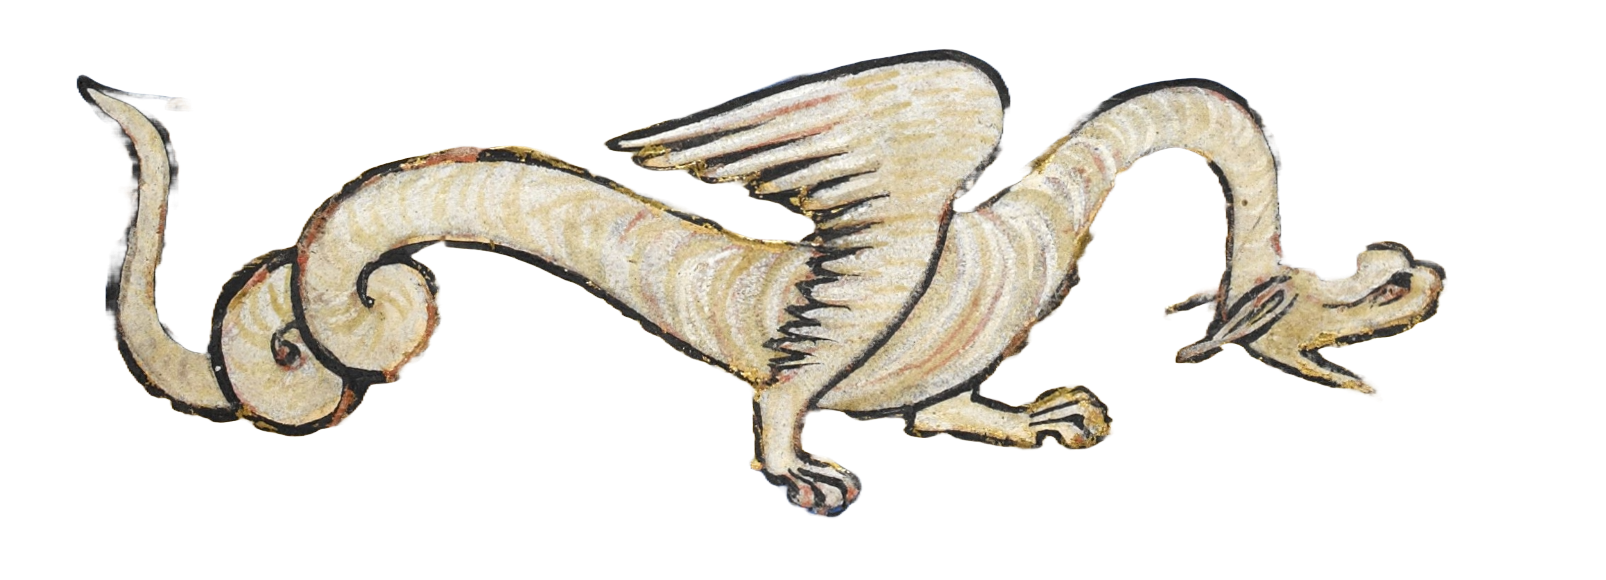 Medieval illumination of a snakelike white dragon with wings and an open mouth